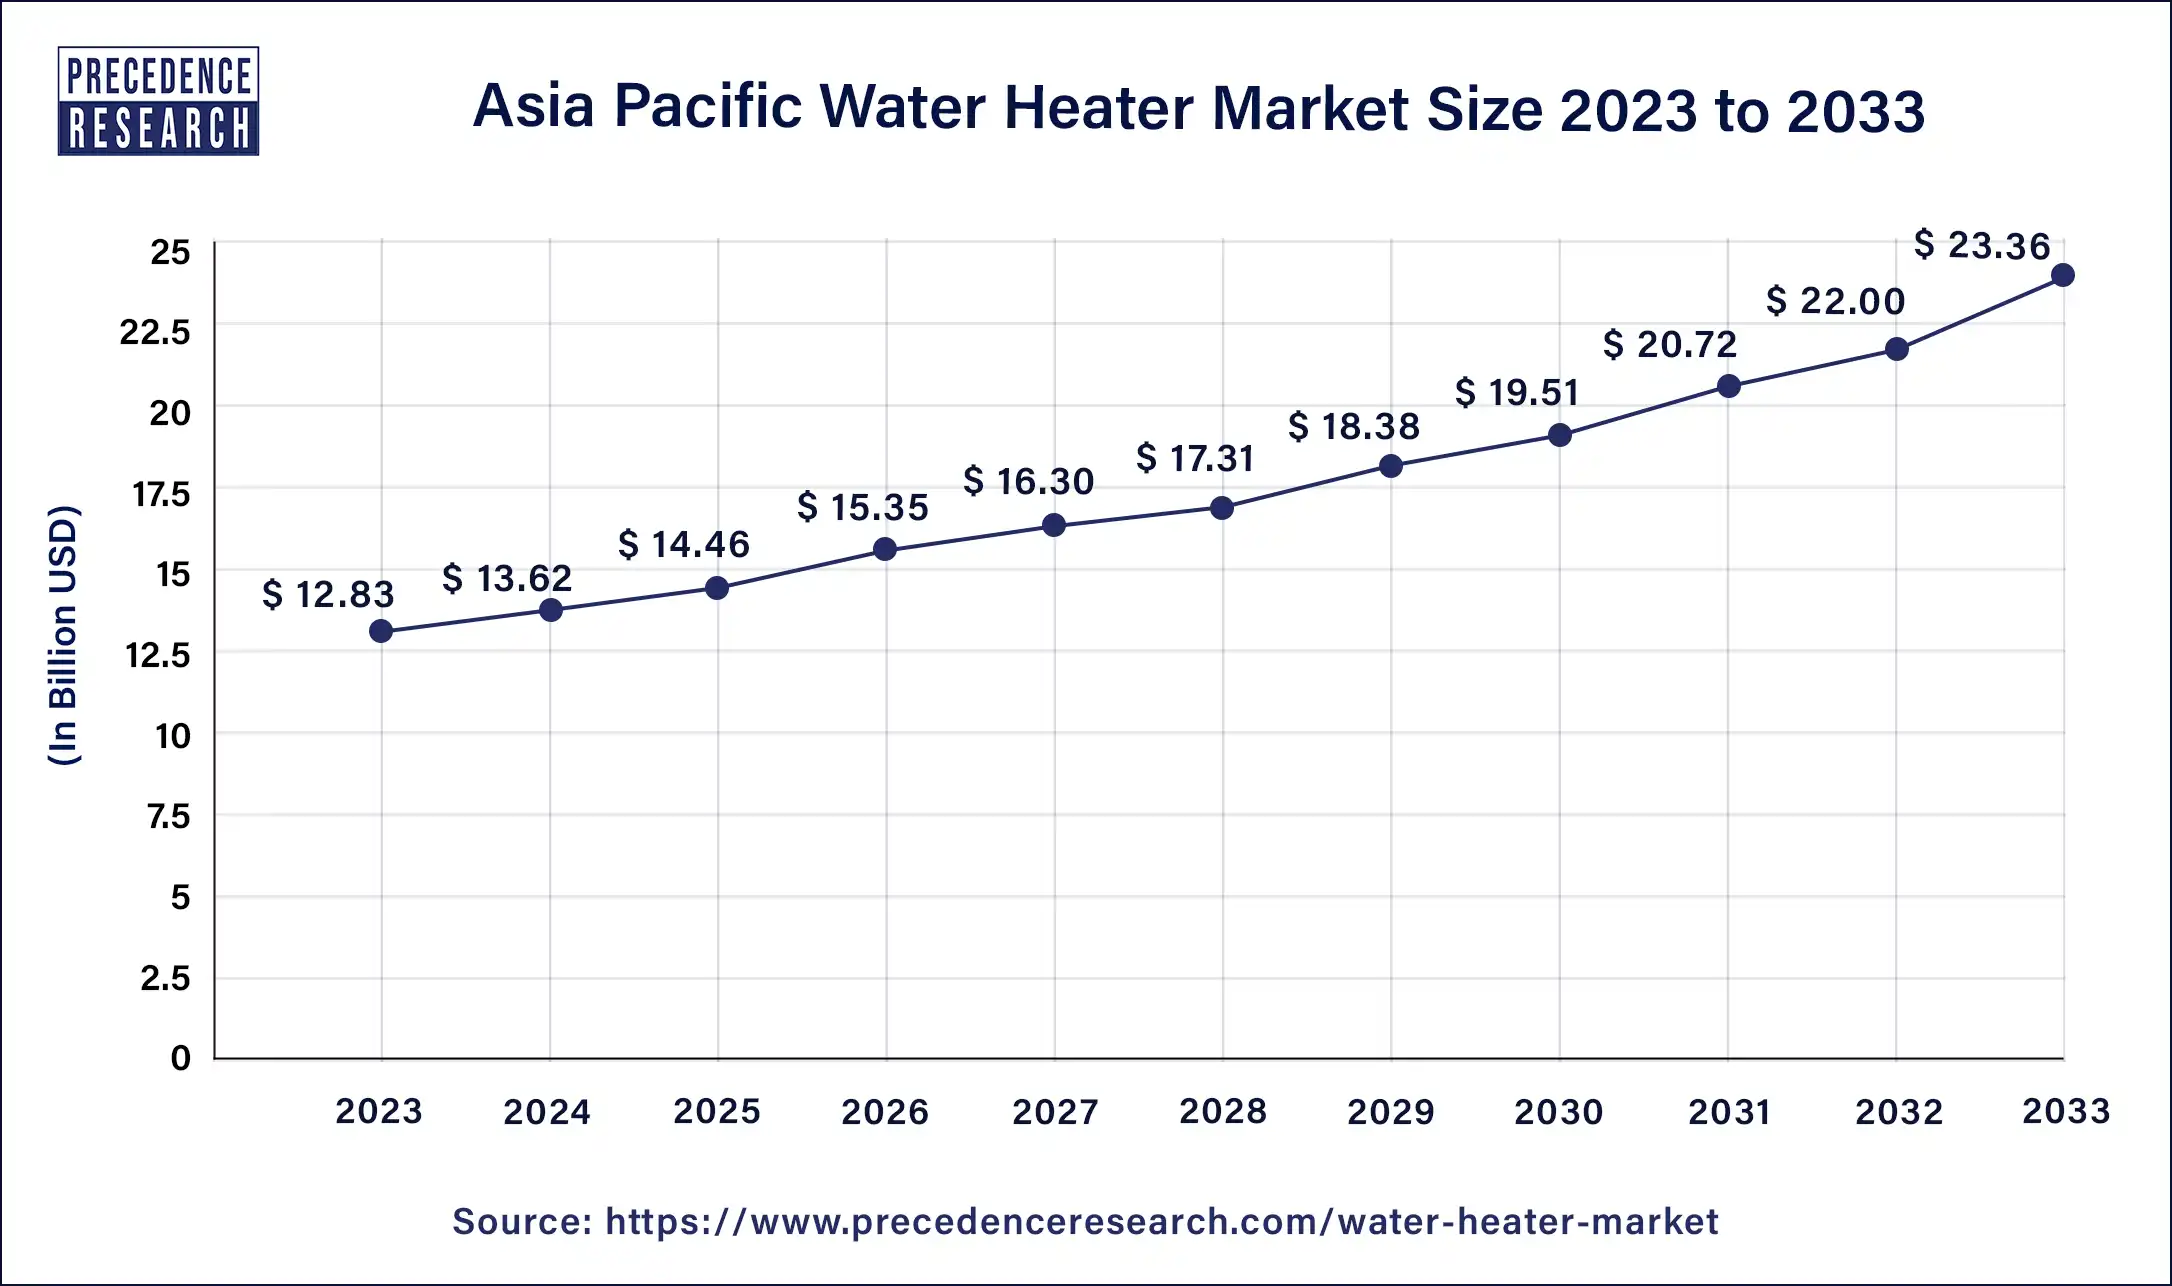 Asia Pacific Water Heater Market Size 2024 to 2033